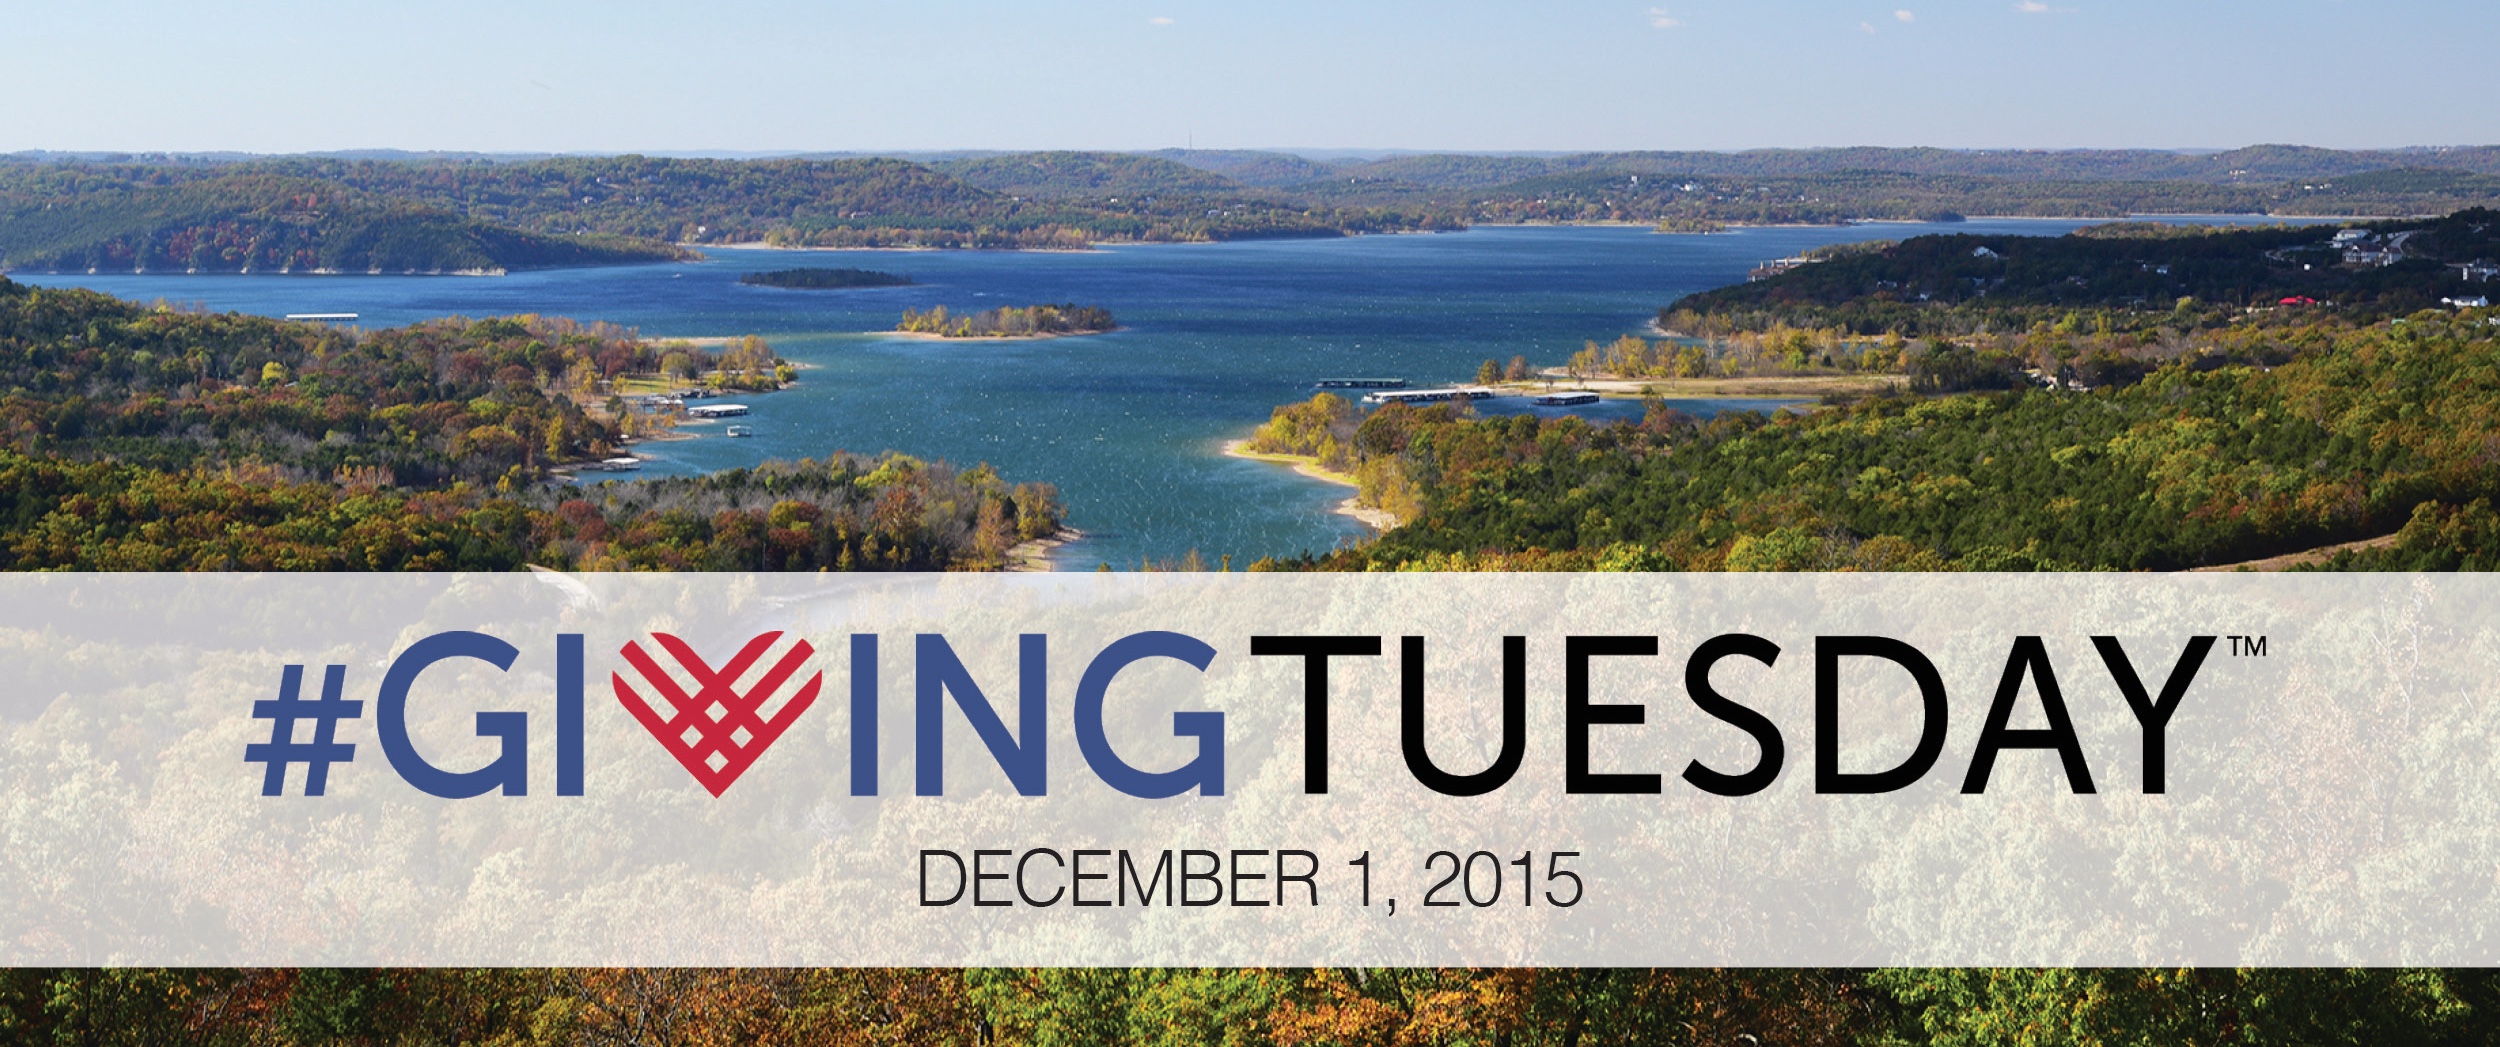 Giving Tuesday Web